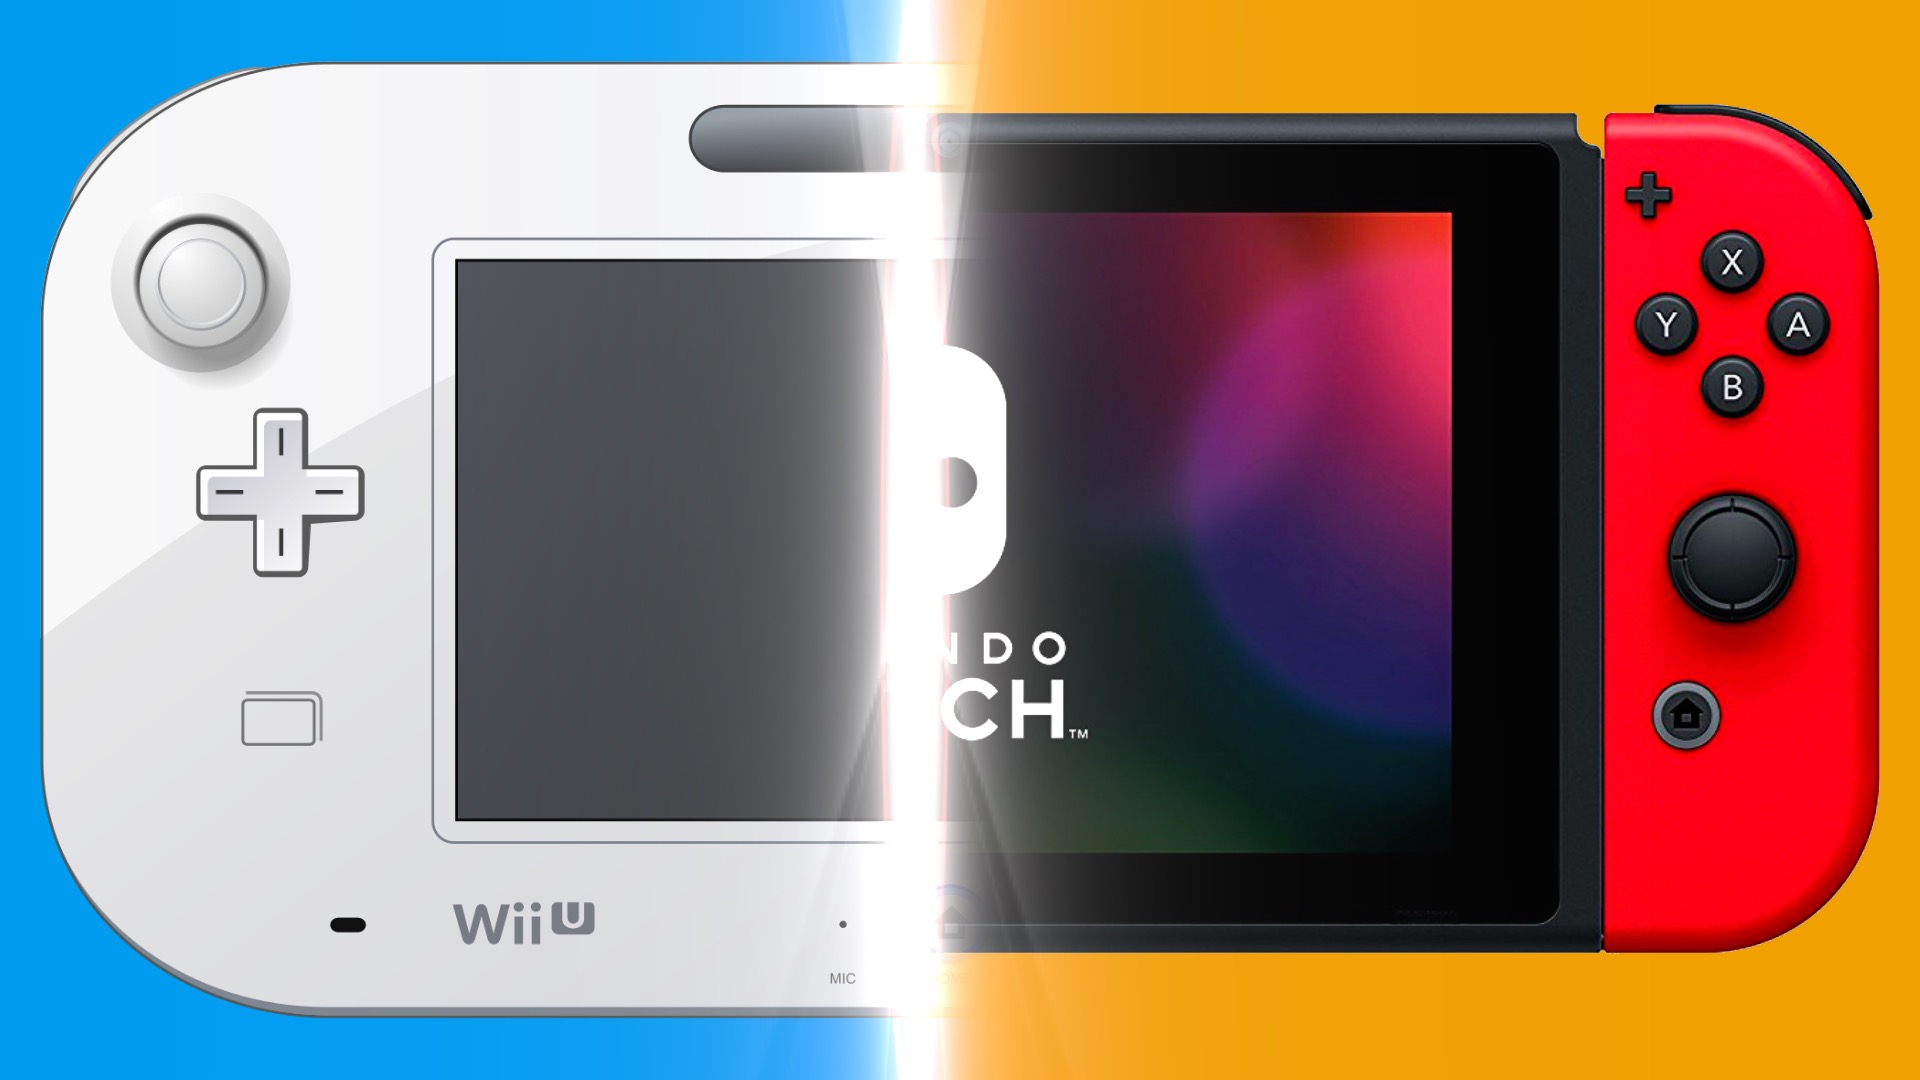 game console similar to wii